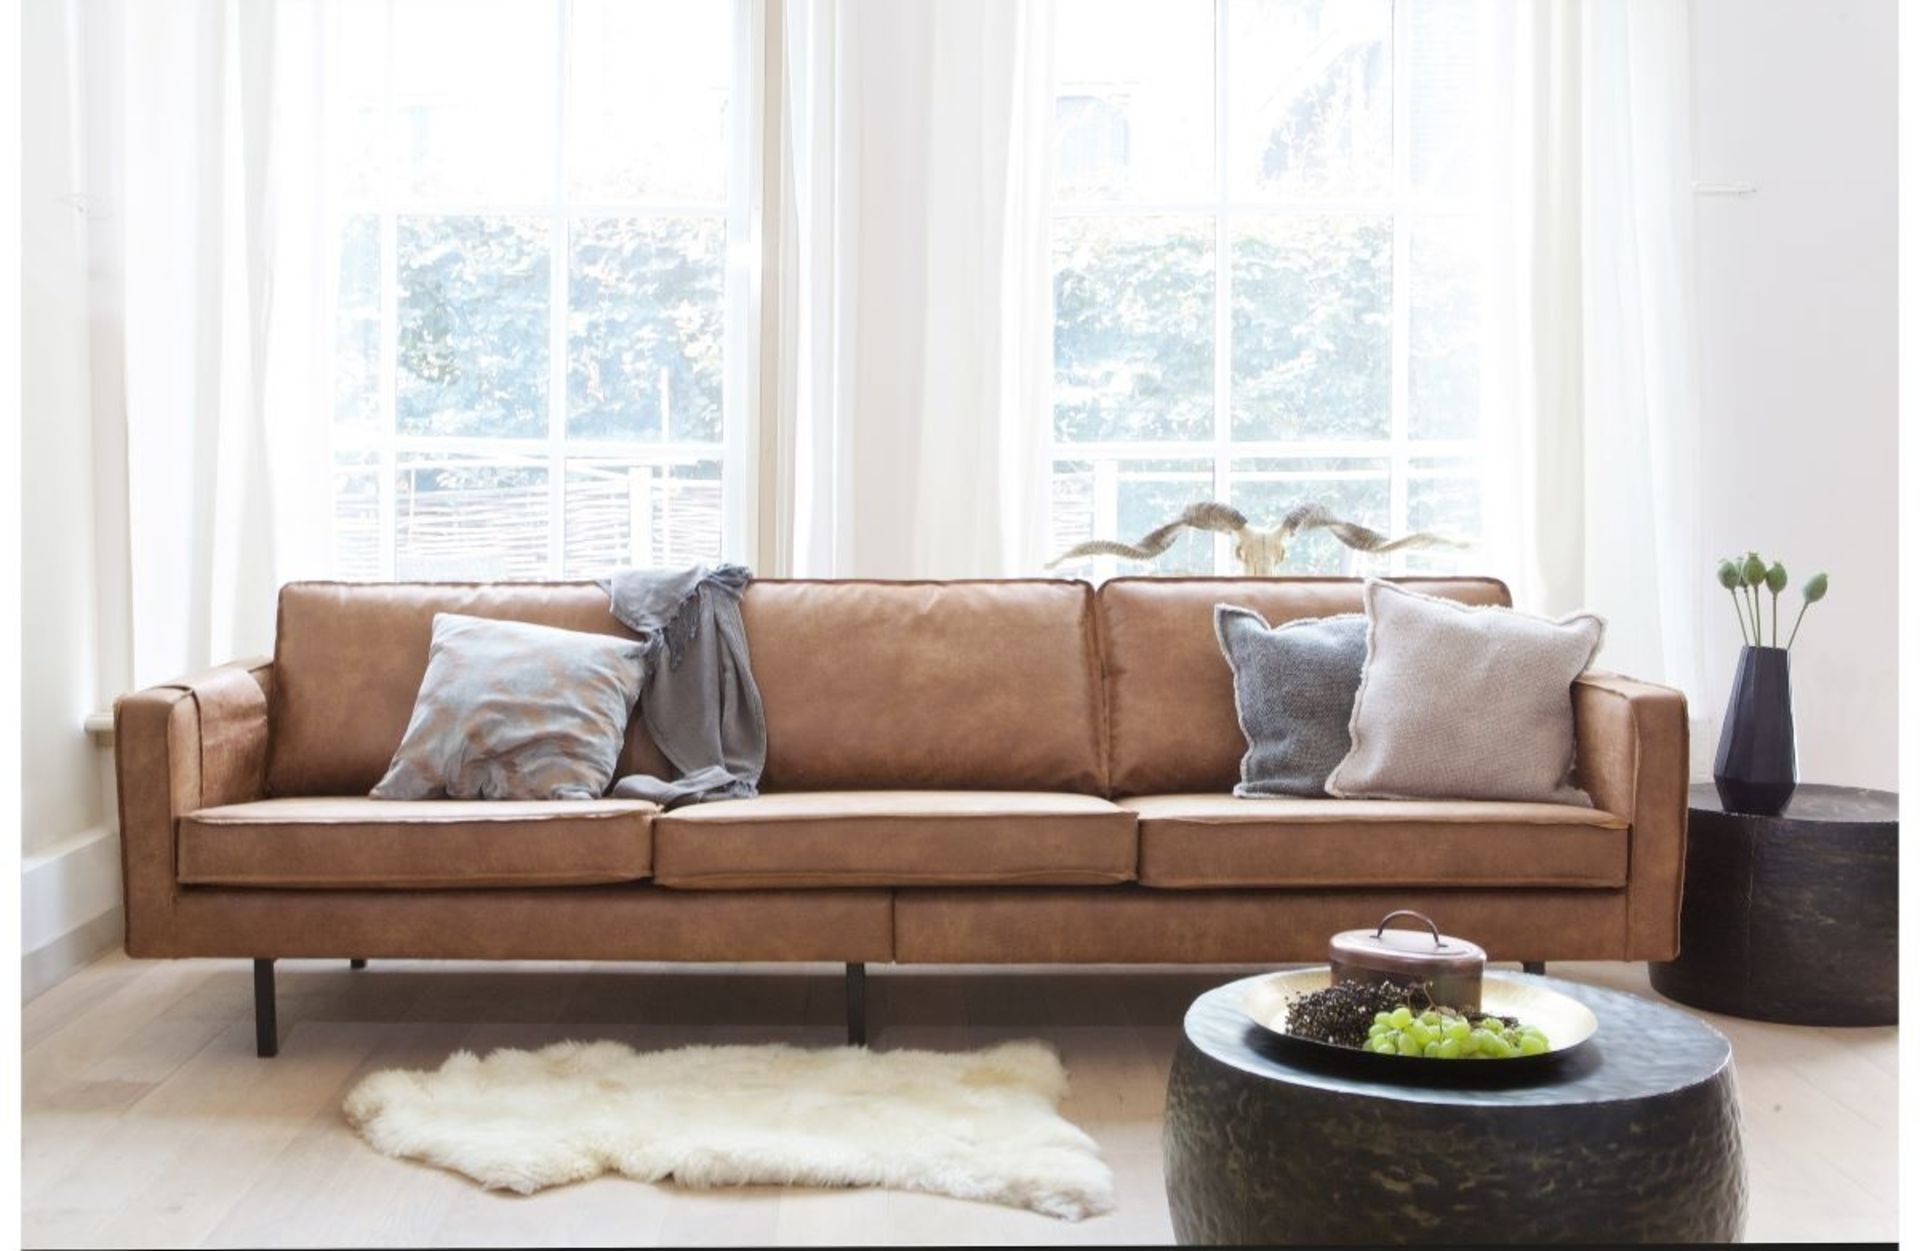 1 x 'Rodeo' Contemporary 3-Seater Leather Sofa In Cognac Brown - Original RRP £1,199.00 - Image 3 of 4